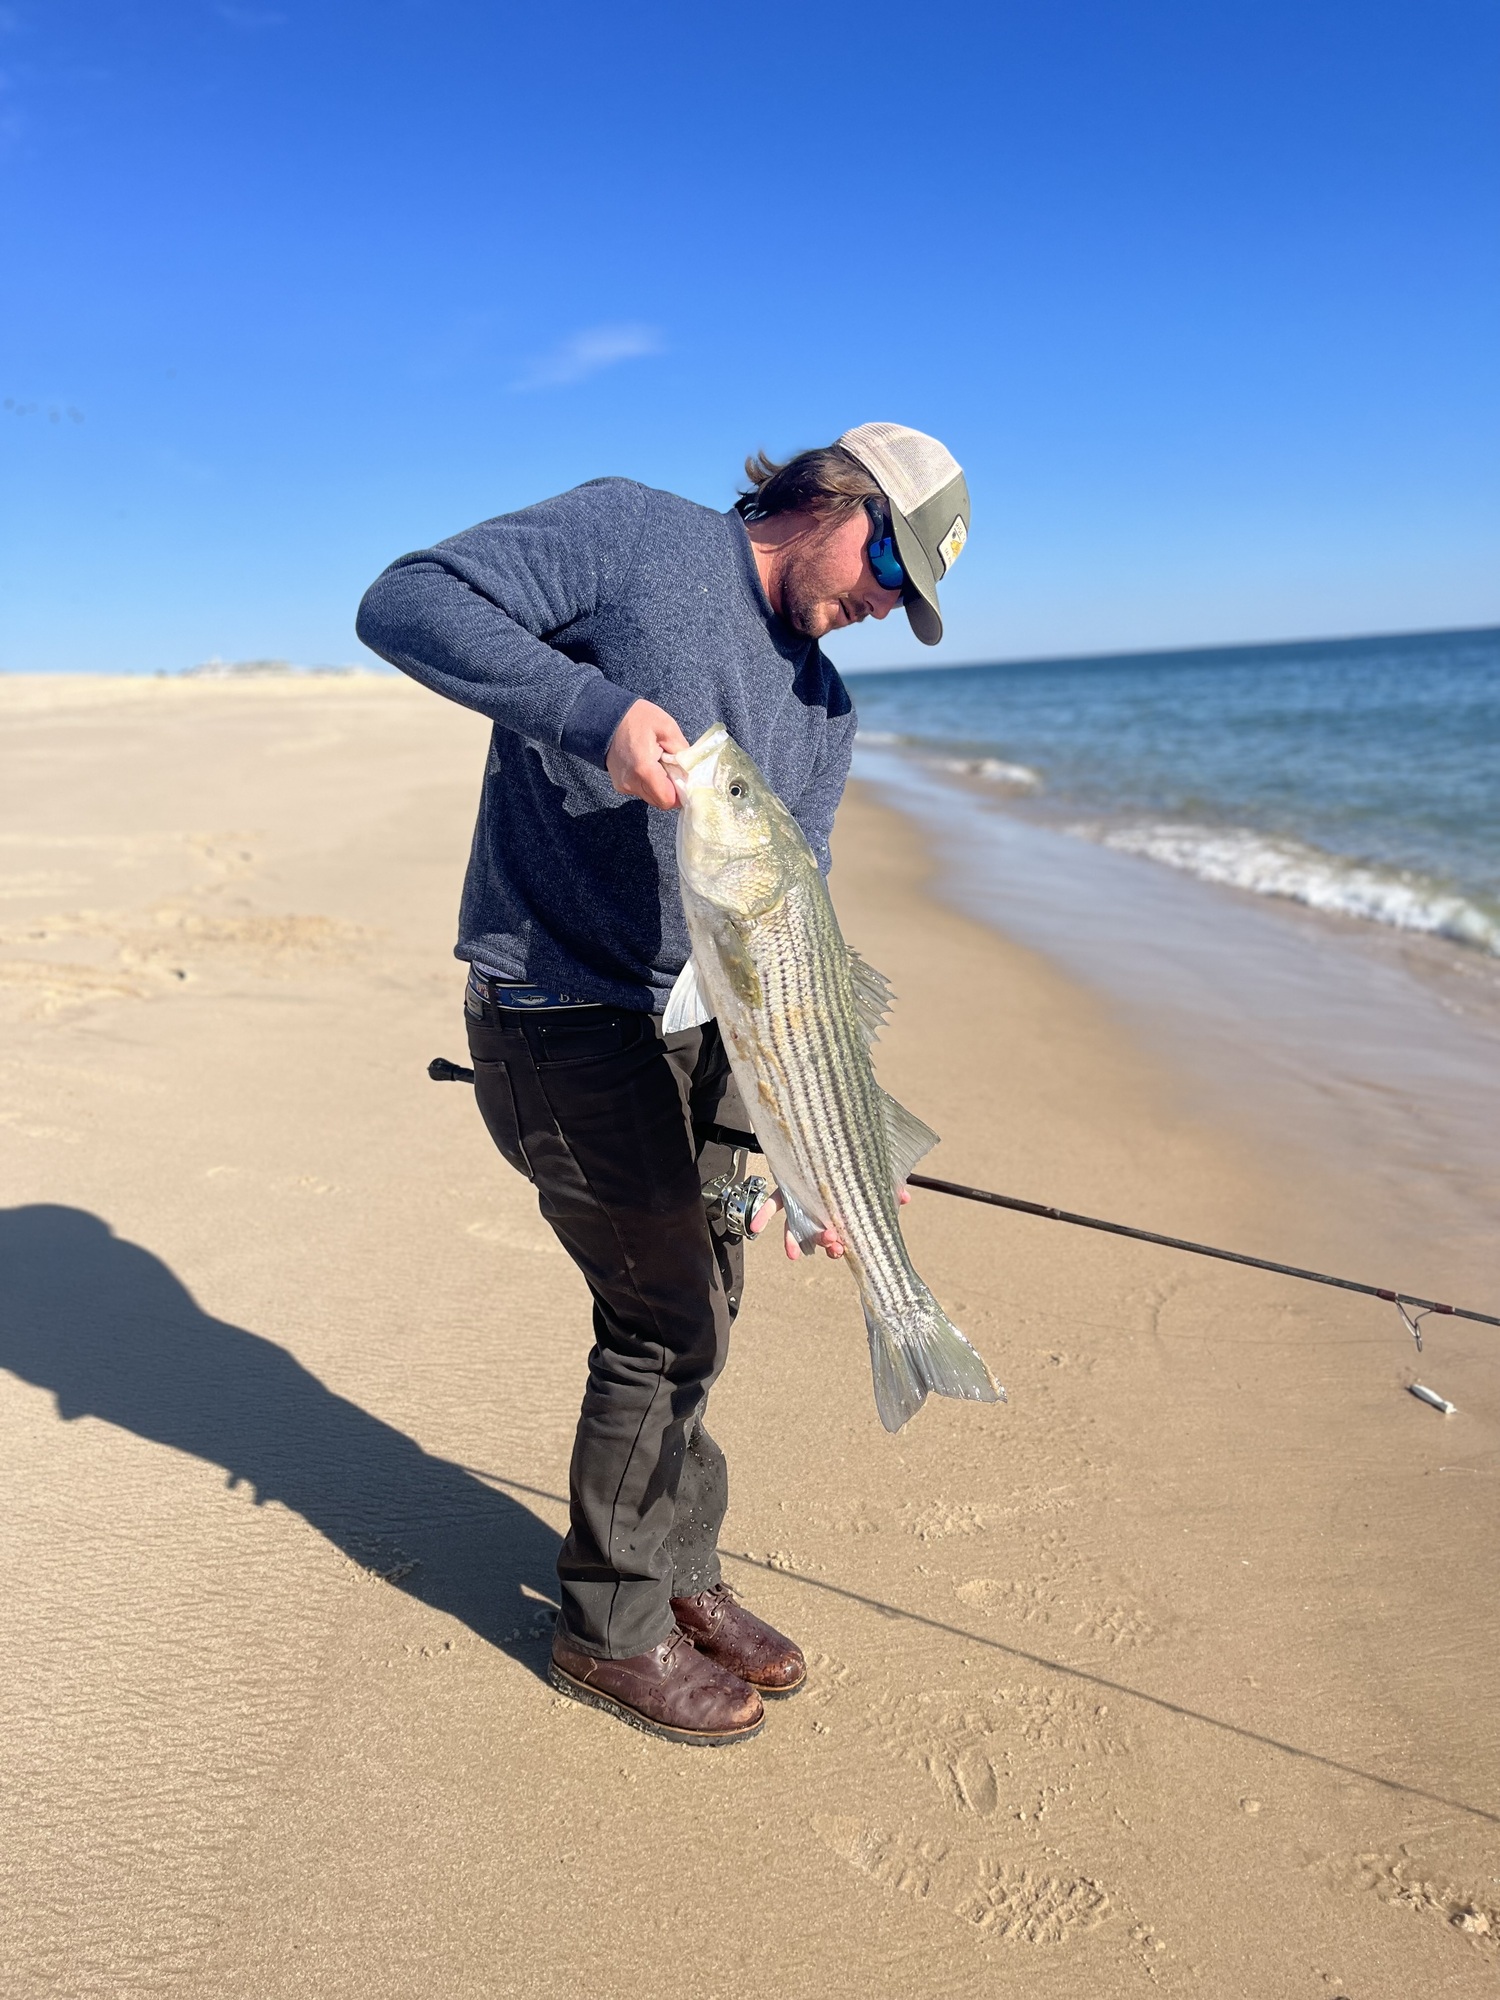 Tim Regan is a Bridgehampton resident and avid surf fisherman whose drone photos and videos of marine life off Long Island's shores on his instagram page @southforksalt has sparked interest (and a bevy of Instagram copycats) in the explosion of life just behind the surf in summertime.